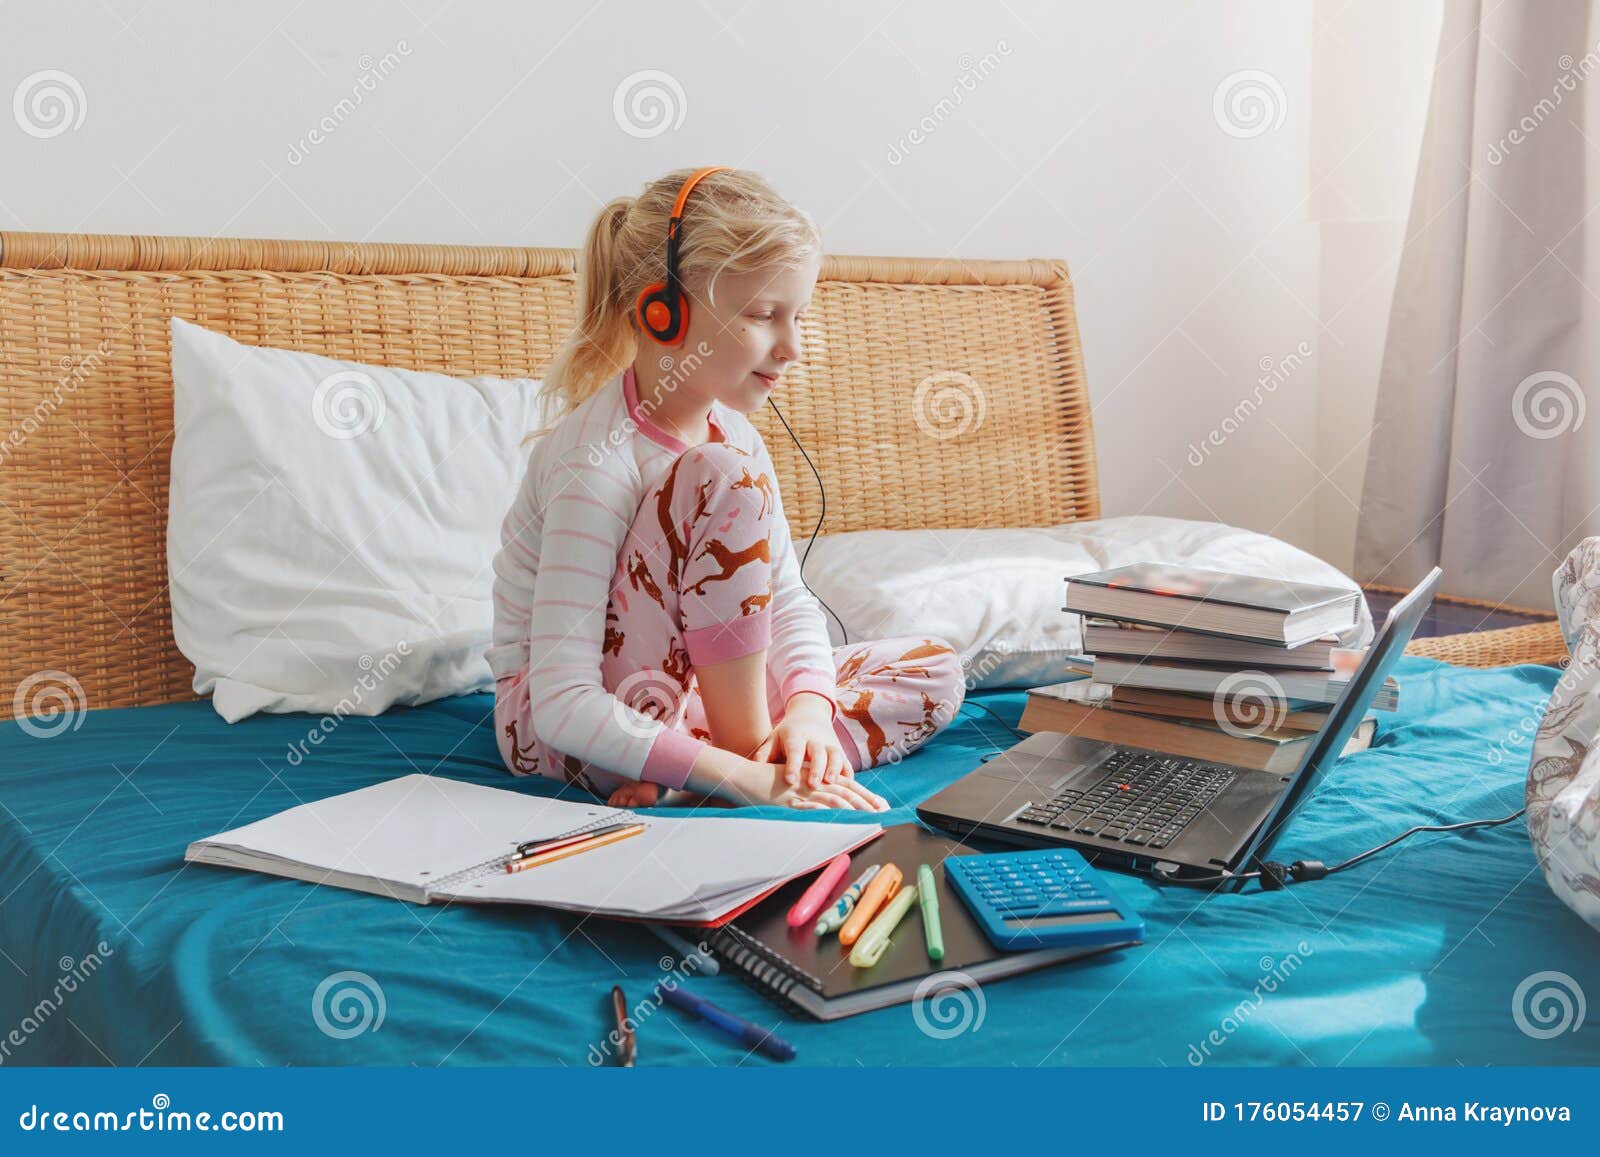 Caucasian Girl Child Sitting In A Bed And Learning Online On Laptop